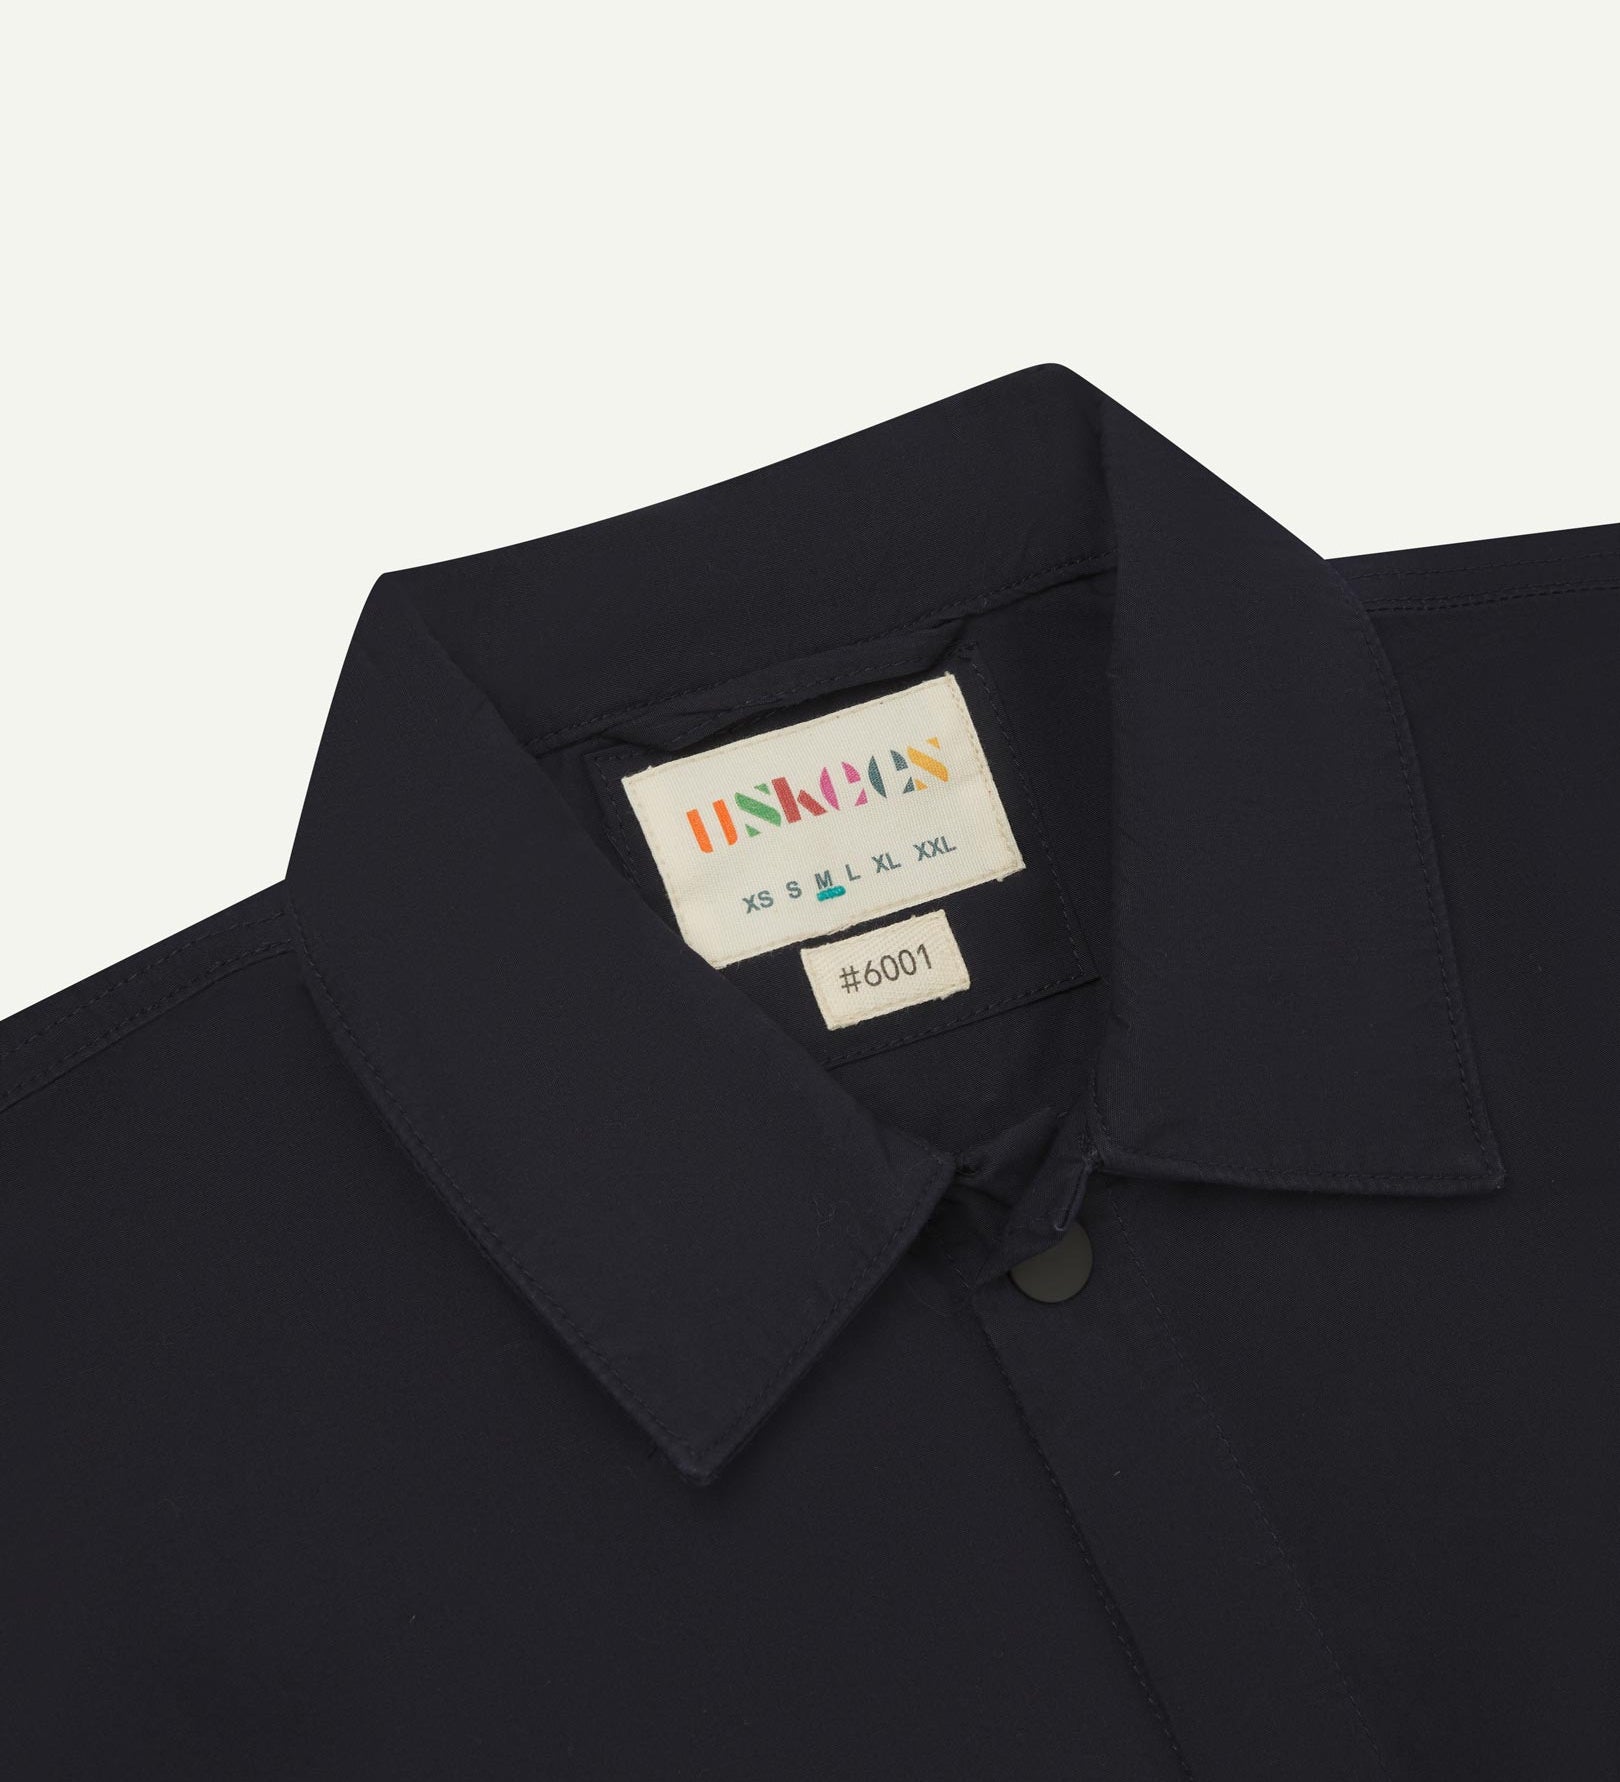 Front close-up view of the collar, popper buttons and Uskees branding label of the midnight blue 6001 lightweight overshirt.